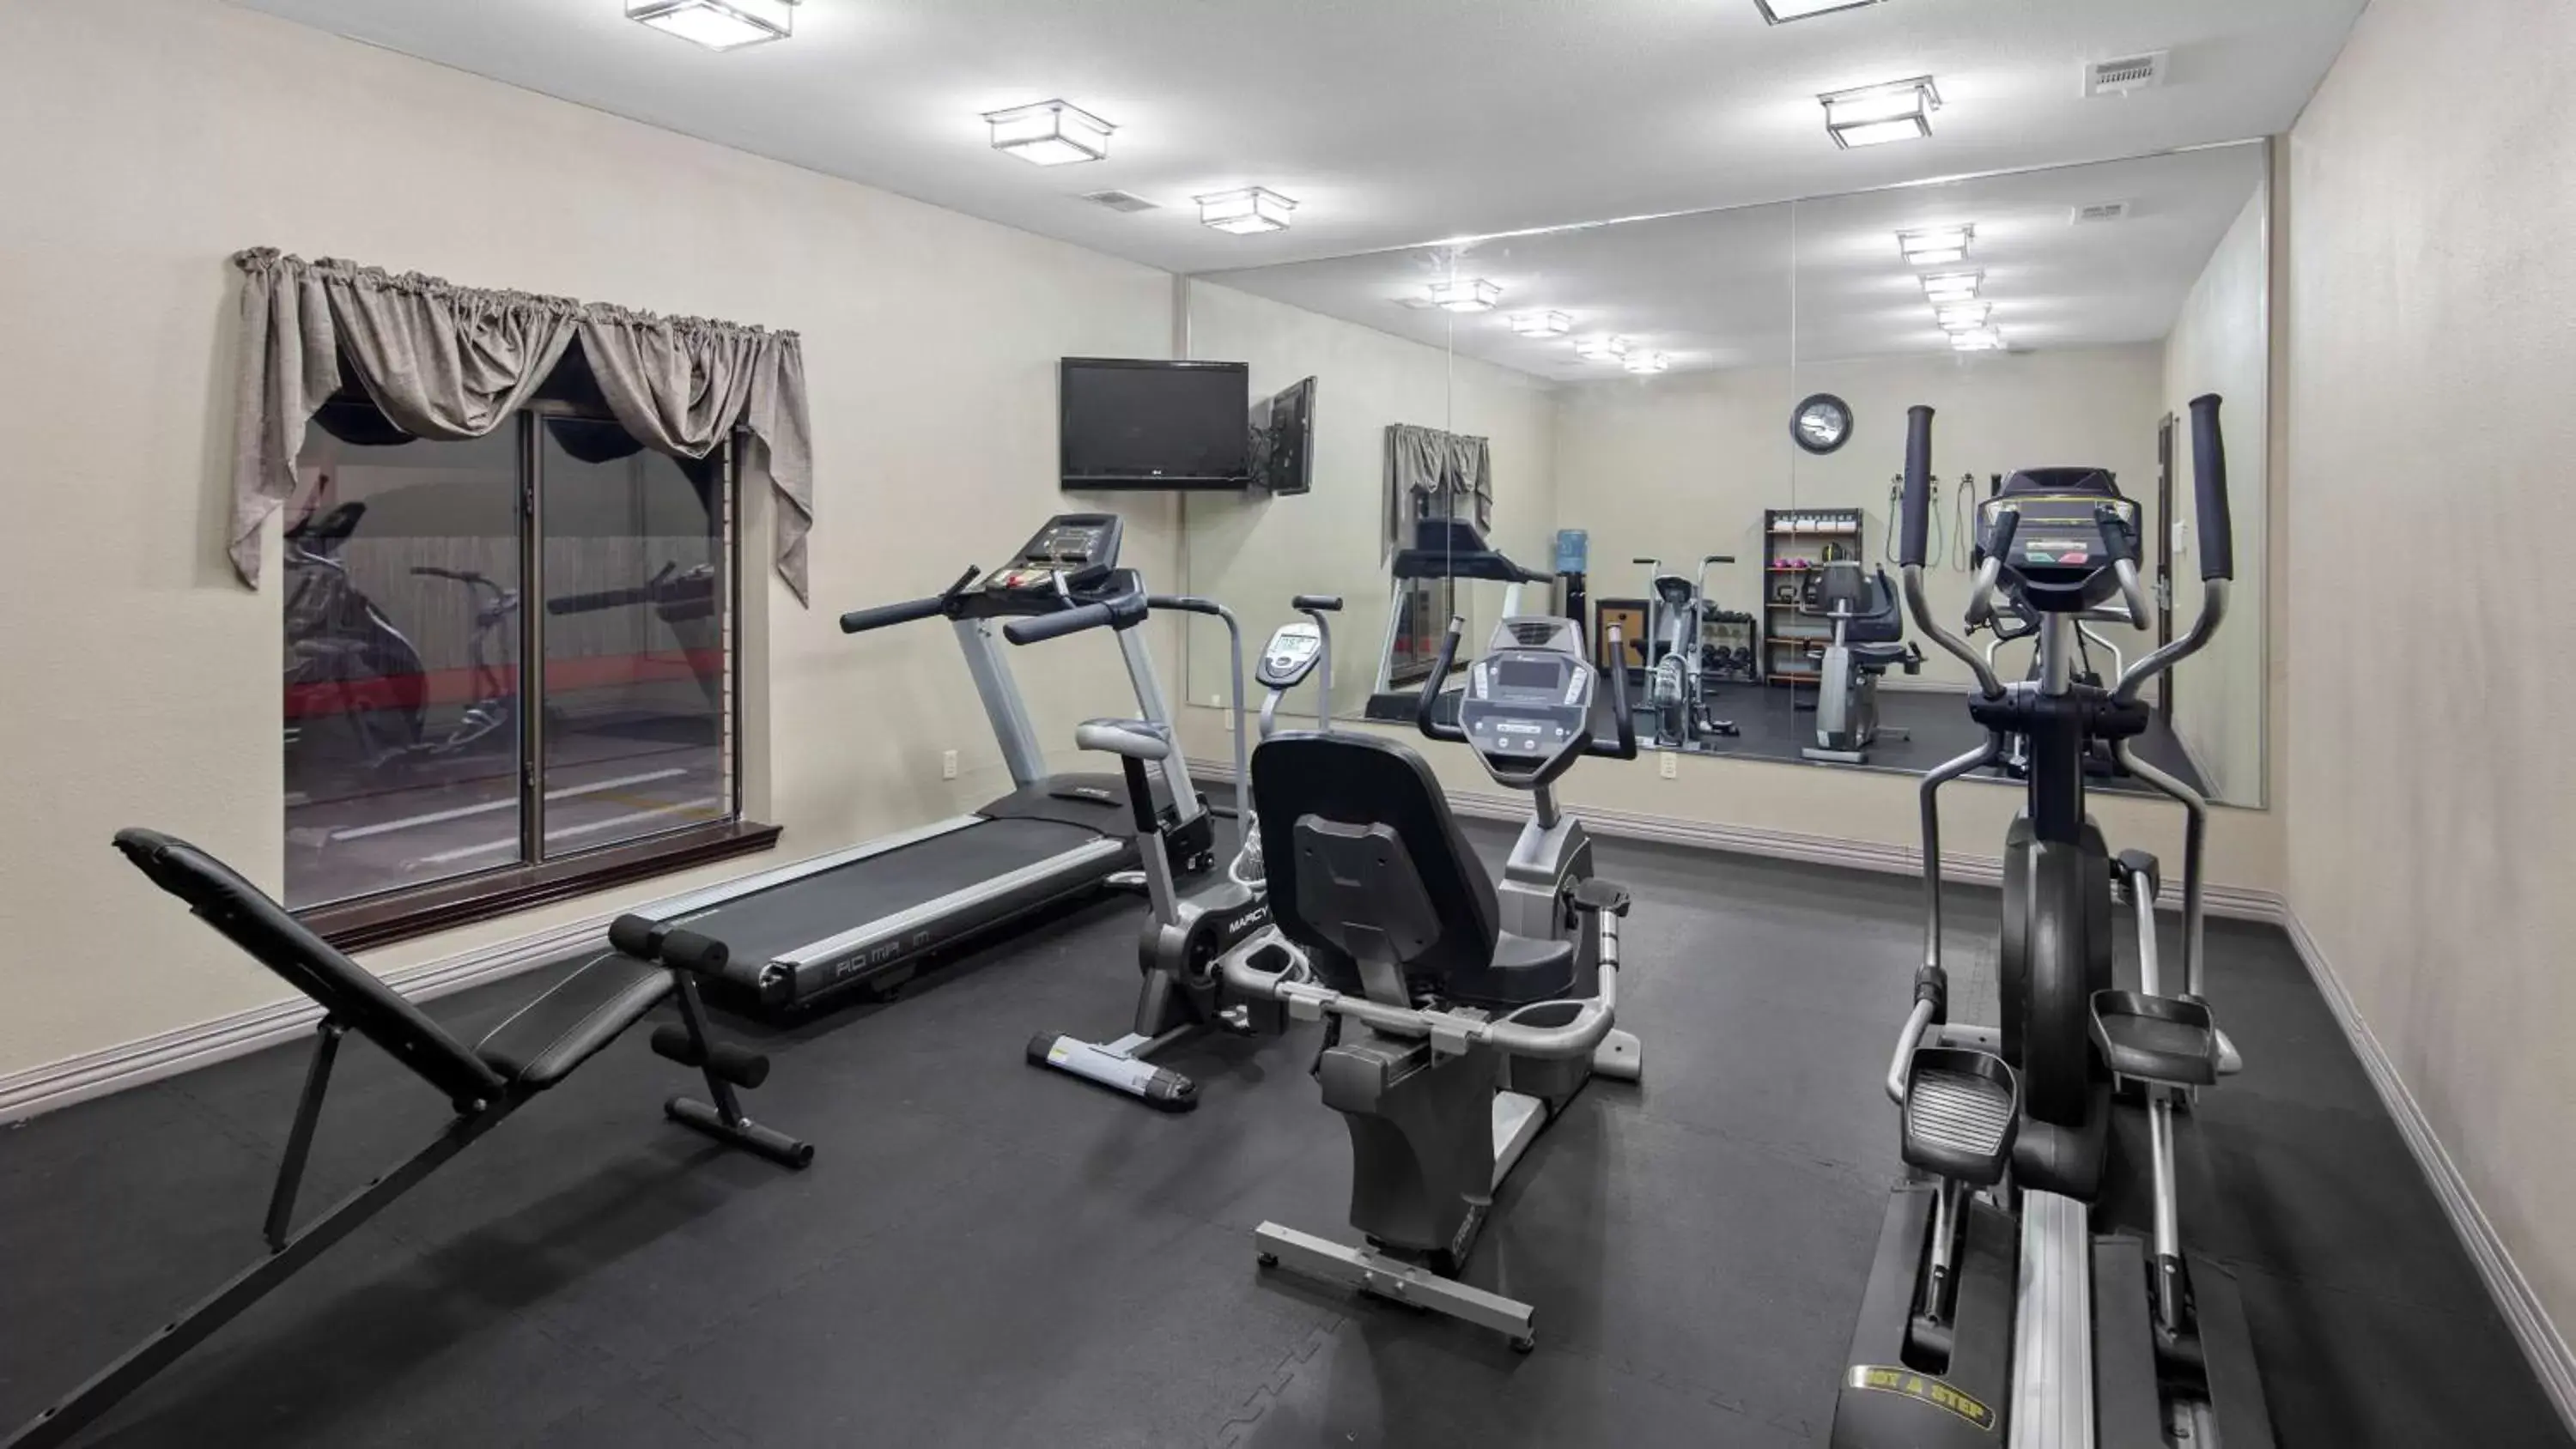 Fitness centre/facilities, Fitness Center/Facilities in Best Western near Lackland AFB Sea World